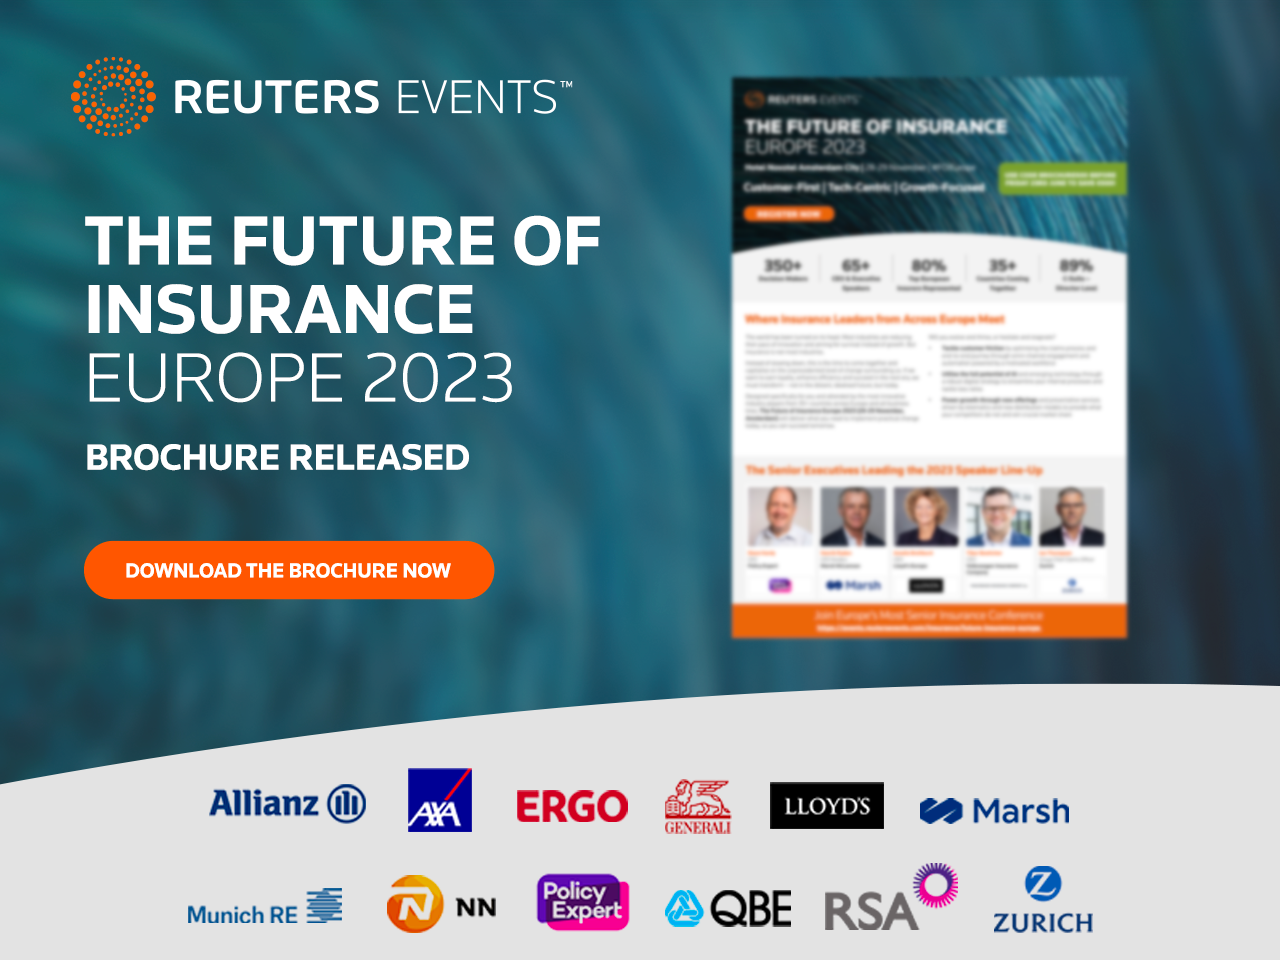 Reuters events: The Future of Insurance Europe, Amsterdam, Netherlands